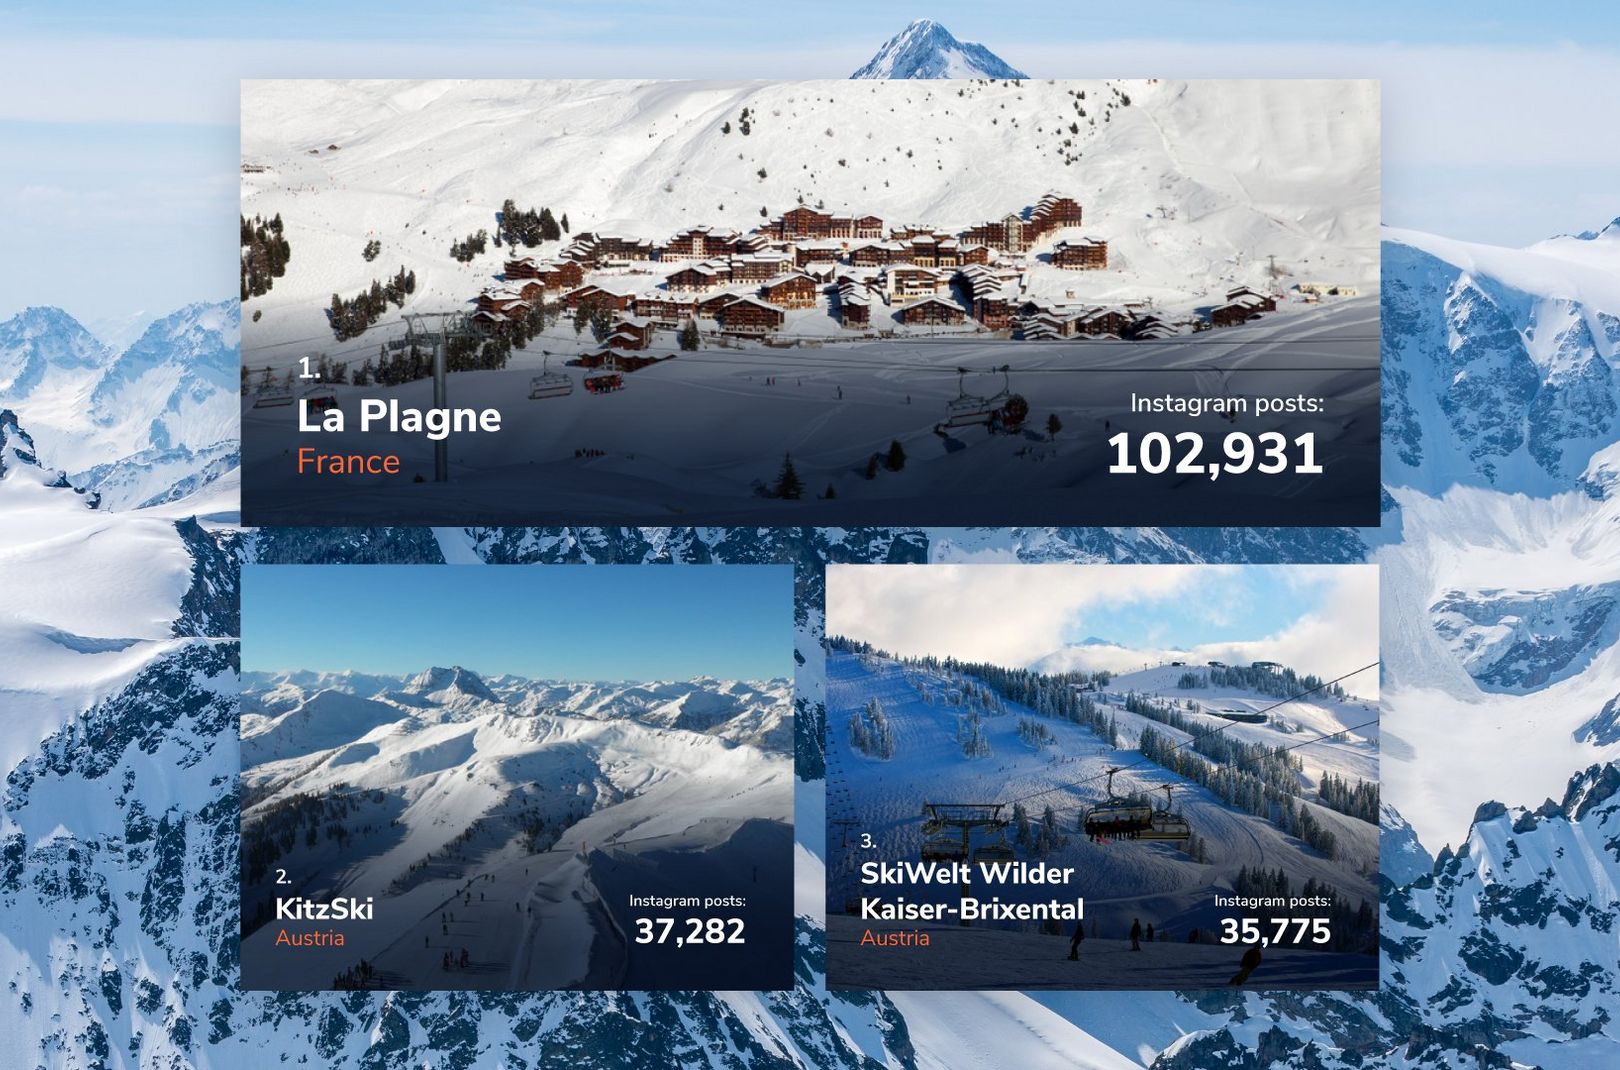 An infographic of the the most popular ski resorts according to Instagram by Blacks Outdoors